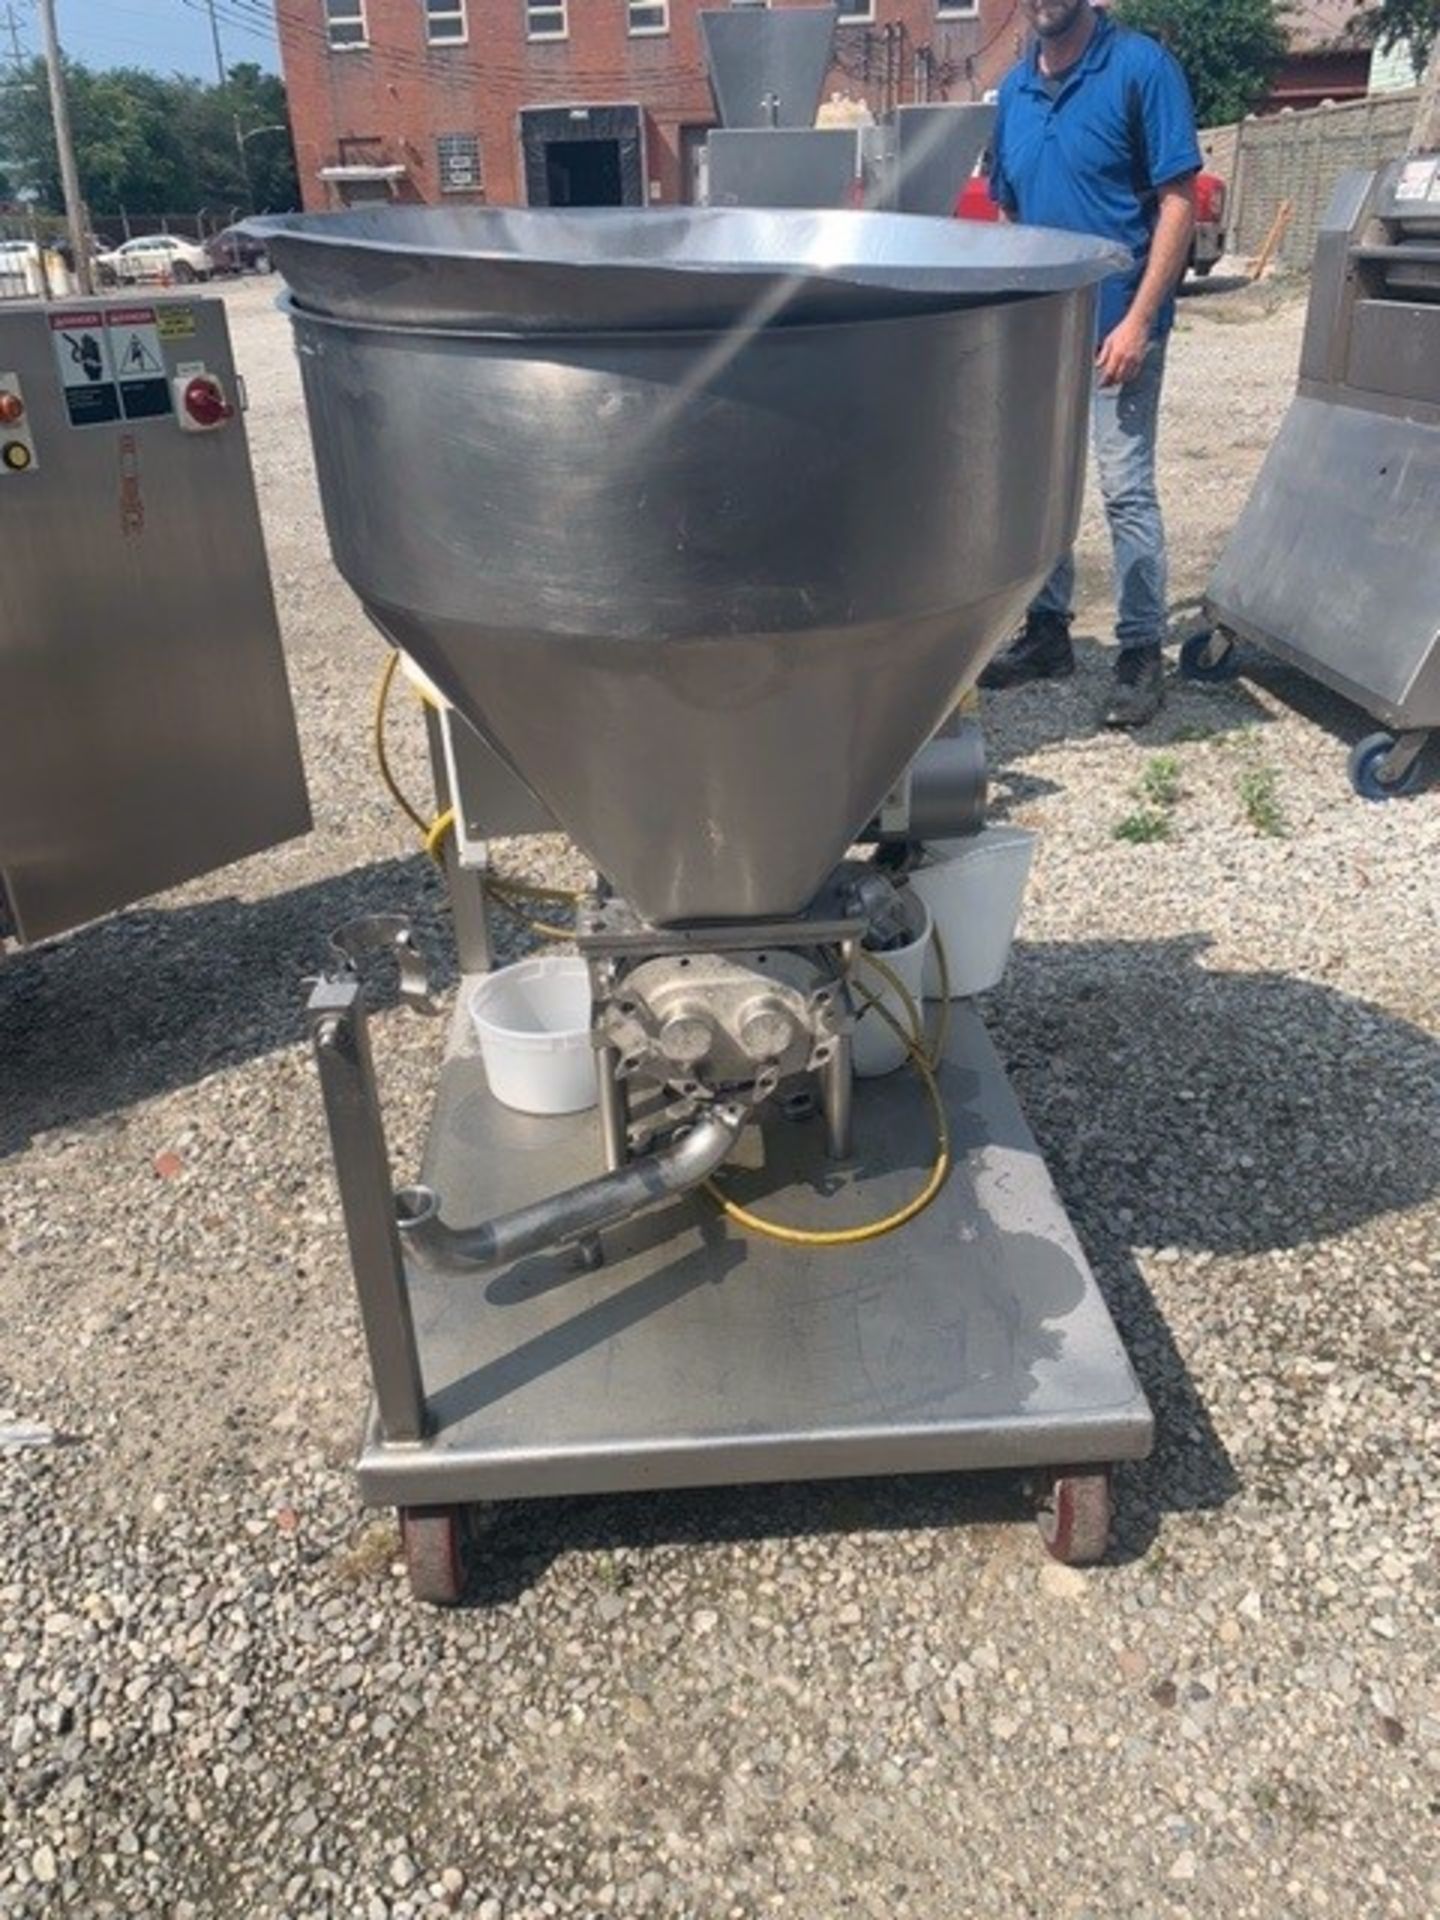 Simplex Pump Model AS-1, With Positive Displacement Pump And Mixing Hopper. Rigging Fee: $75 - Image 4 of 4